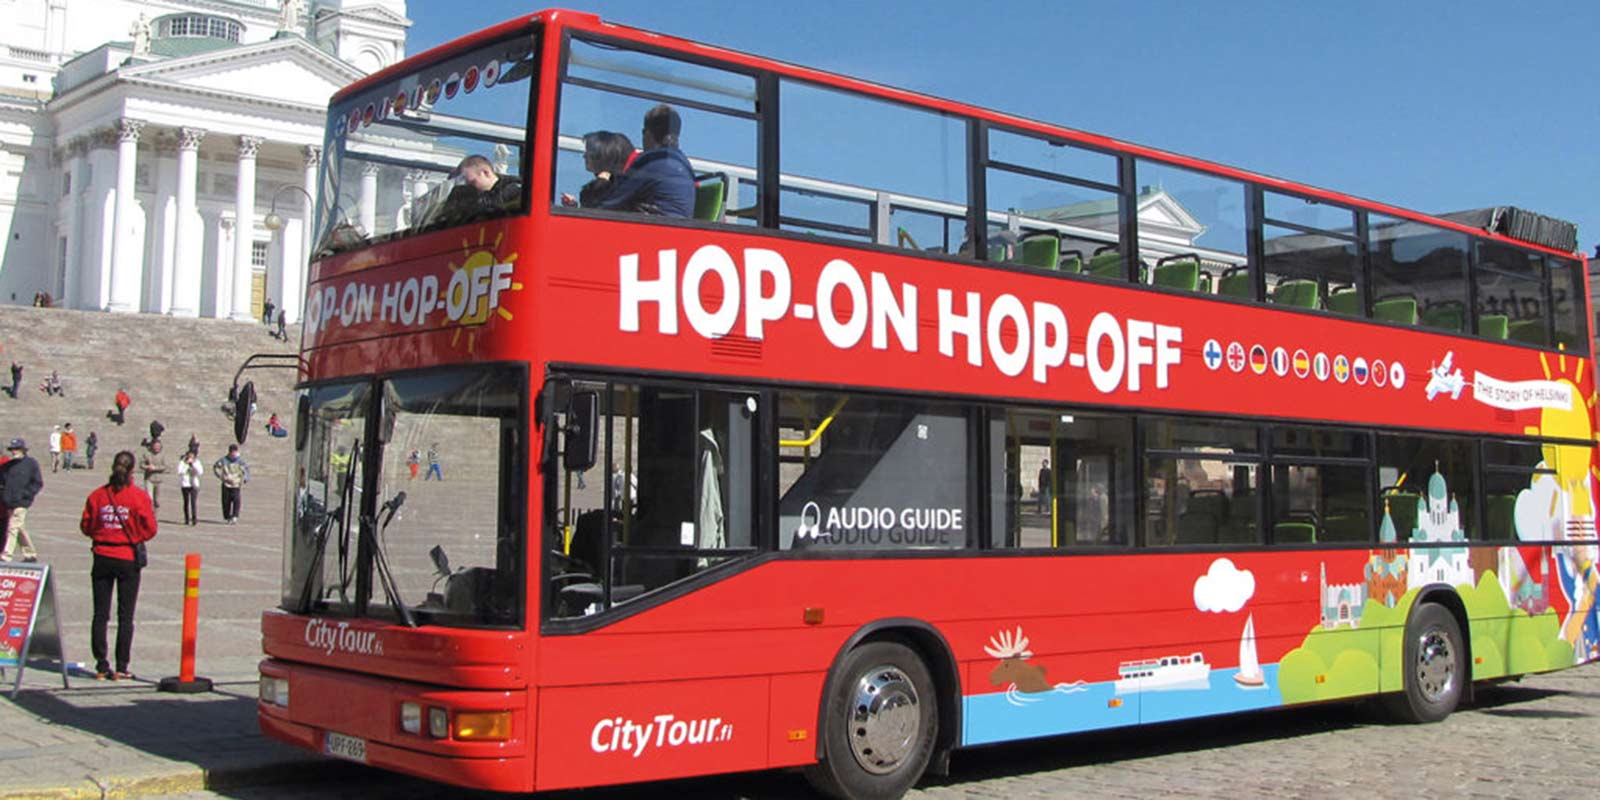 The Hop-on Hop-off Bus in Helsinki | Redsightseeing